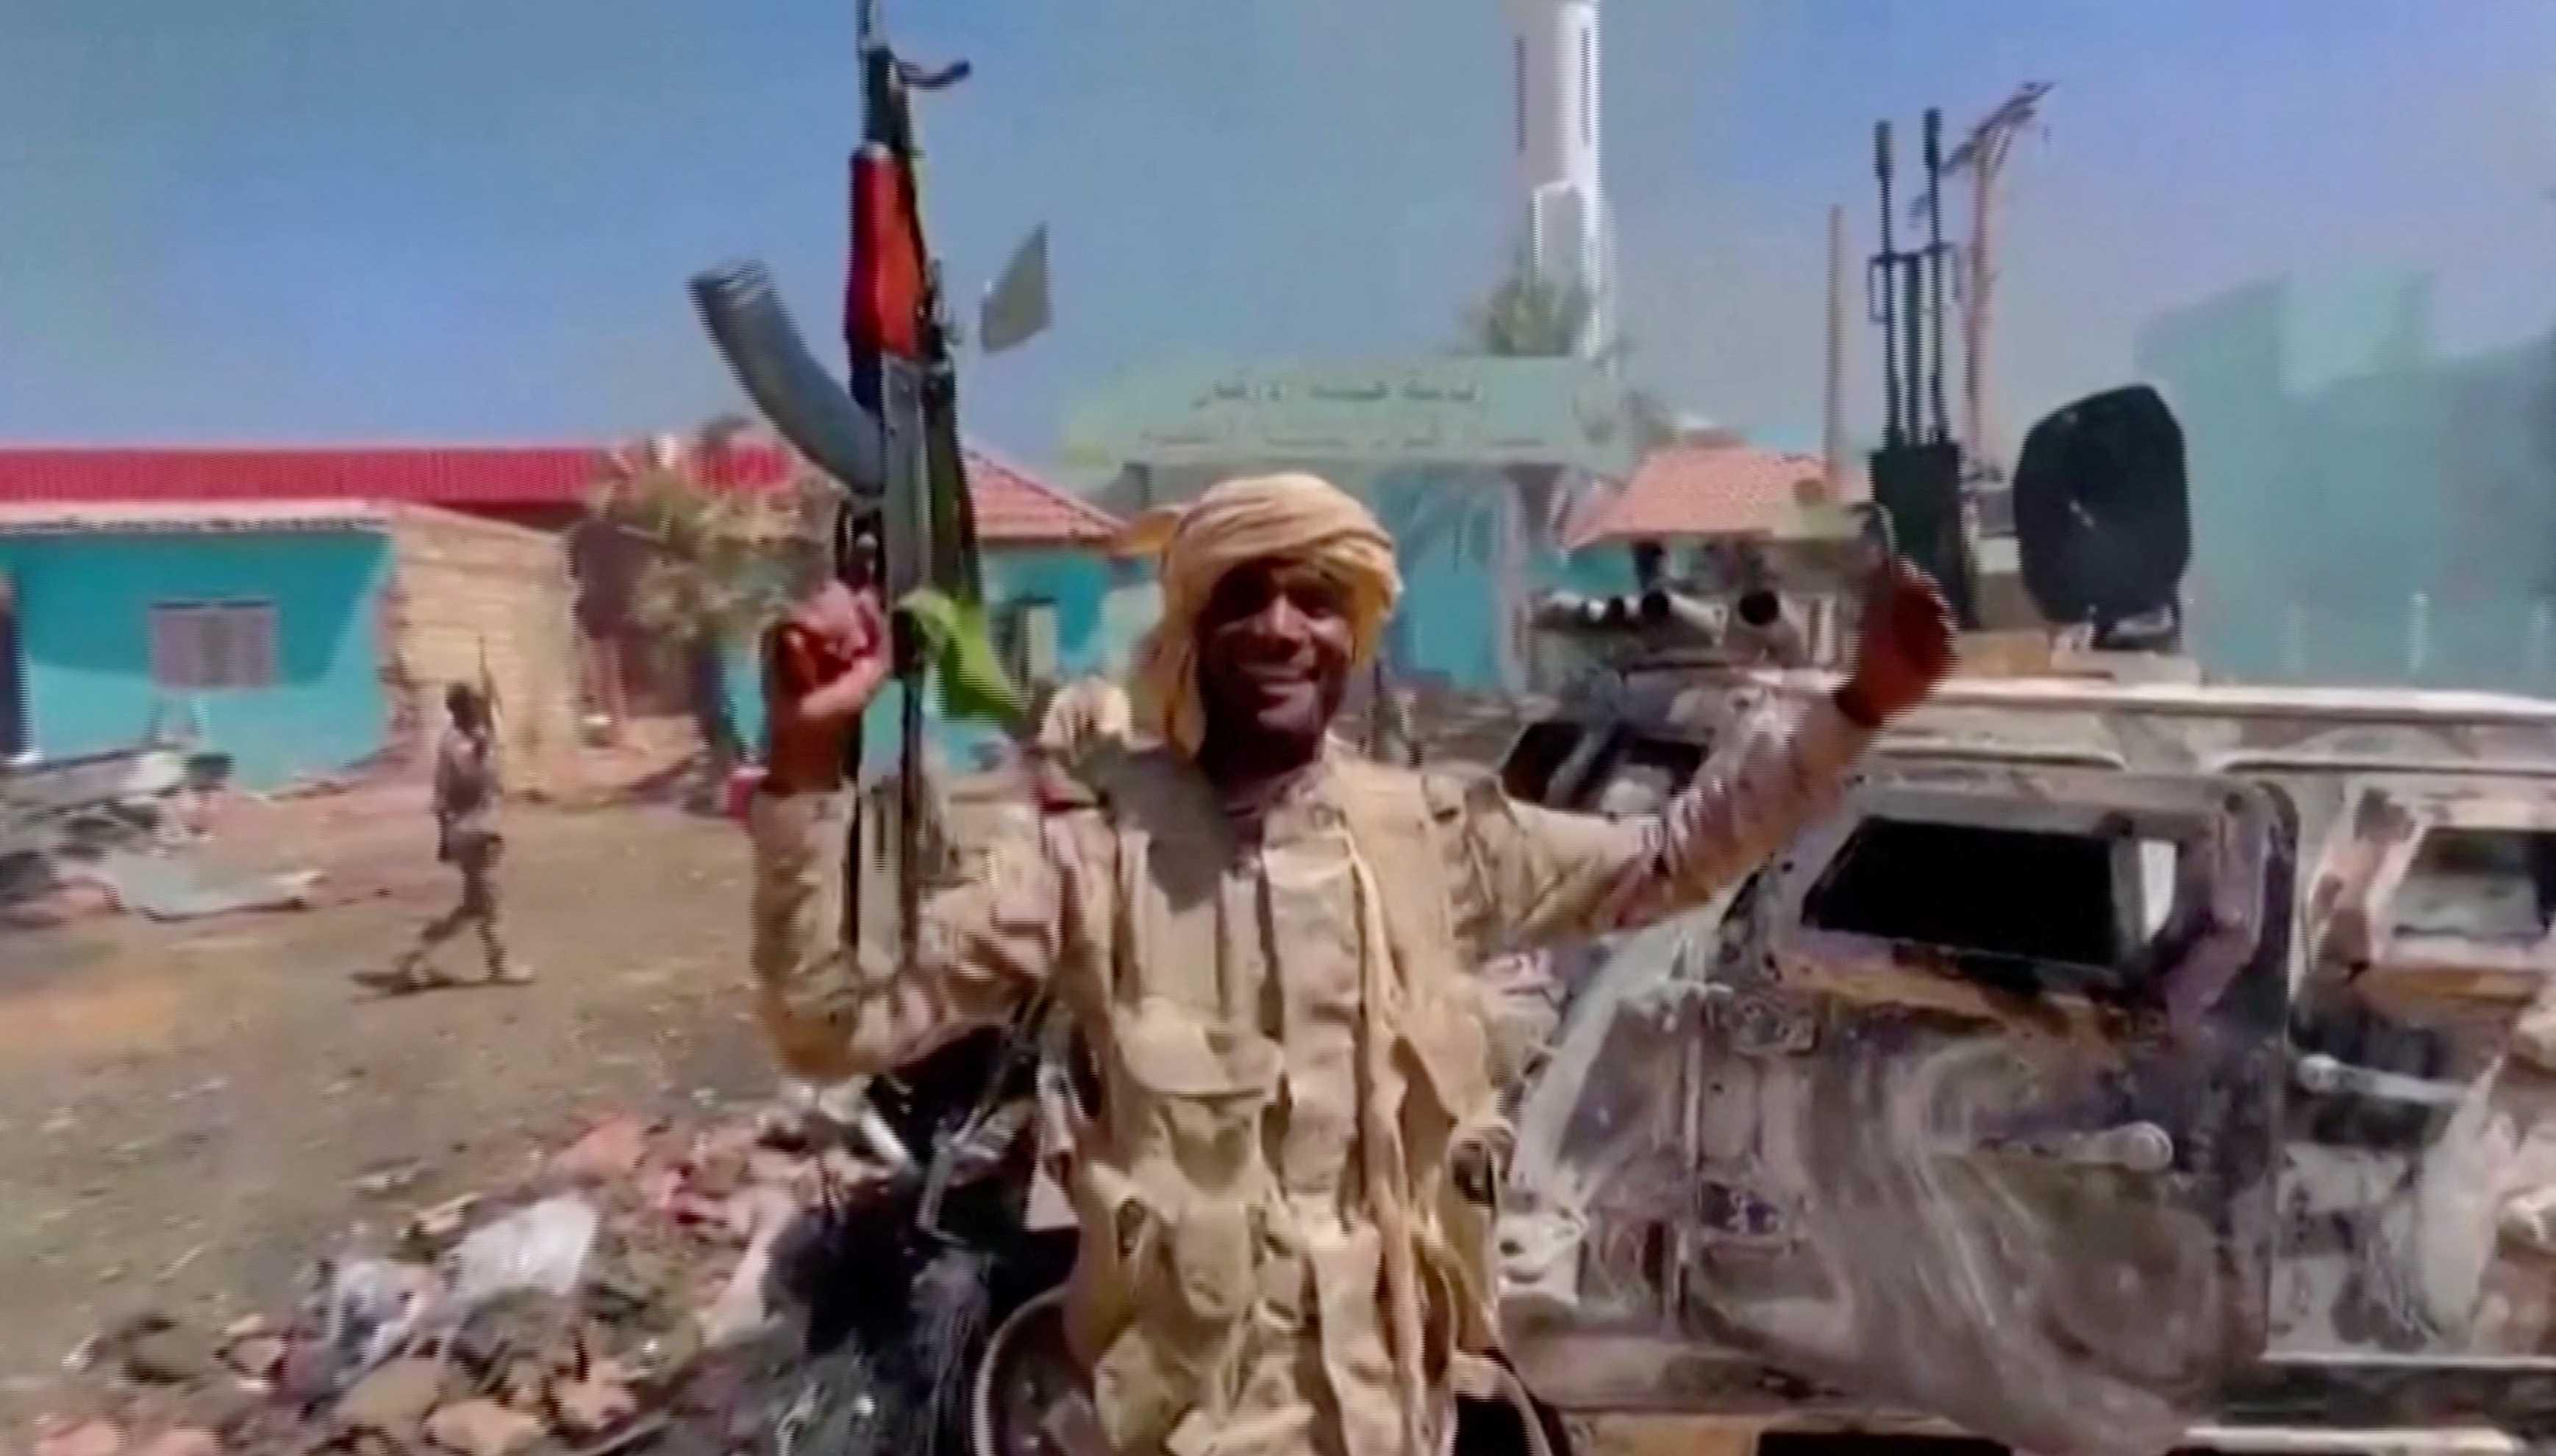 A member of the RSF forces walks around the destroyed Air Defence Forces command site in Khartoum, Sudan, in this screengrab obtained from a social media video on June 14. Photo: Reuters